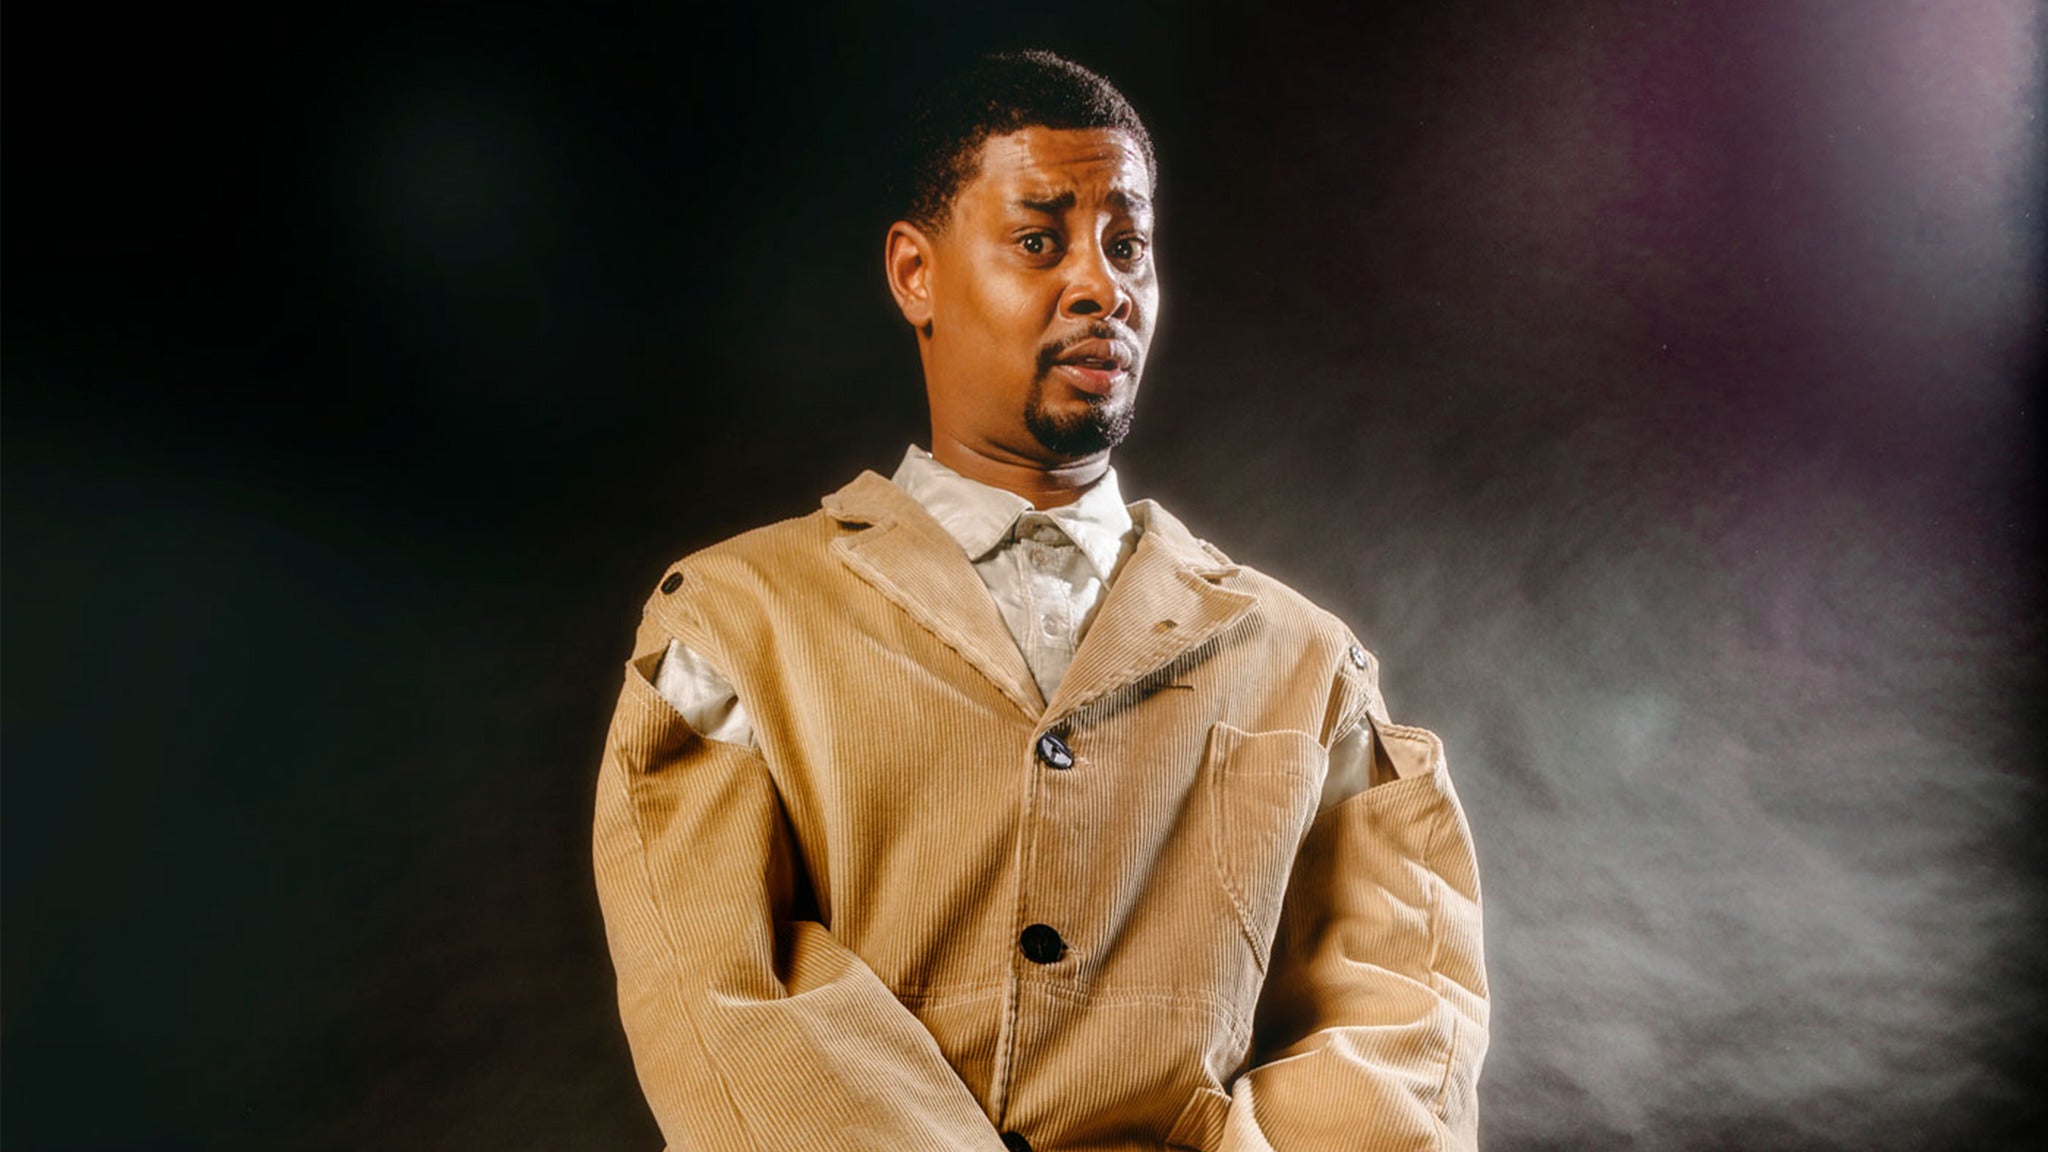 Danny Brown in Cleveland event information